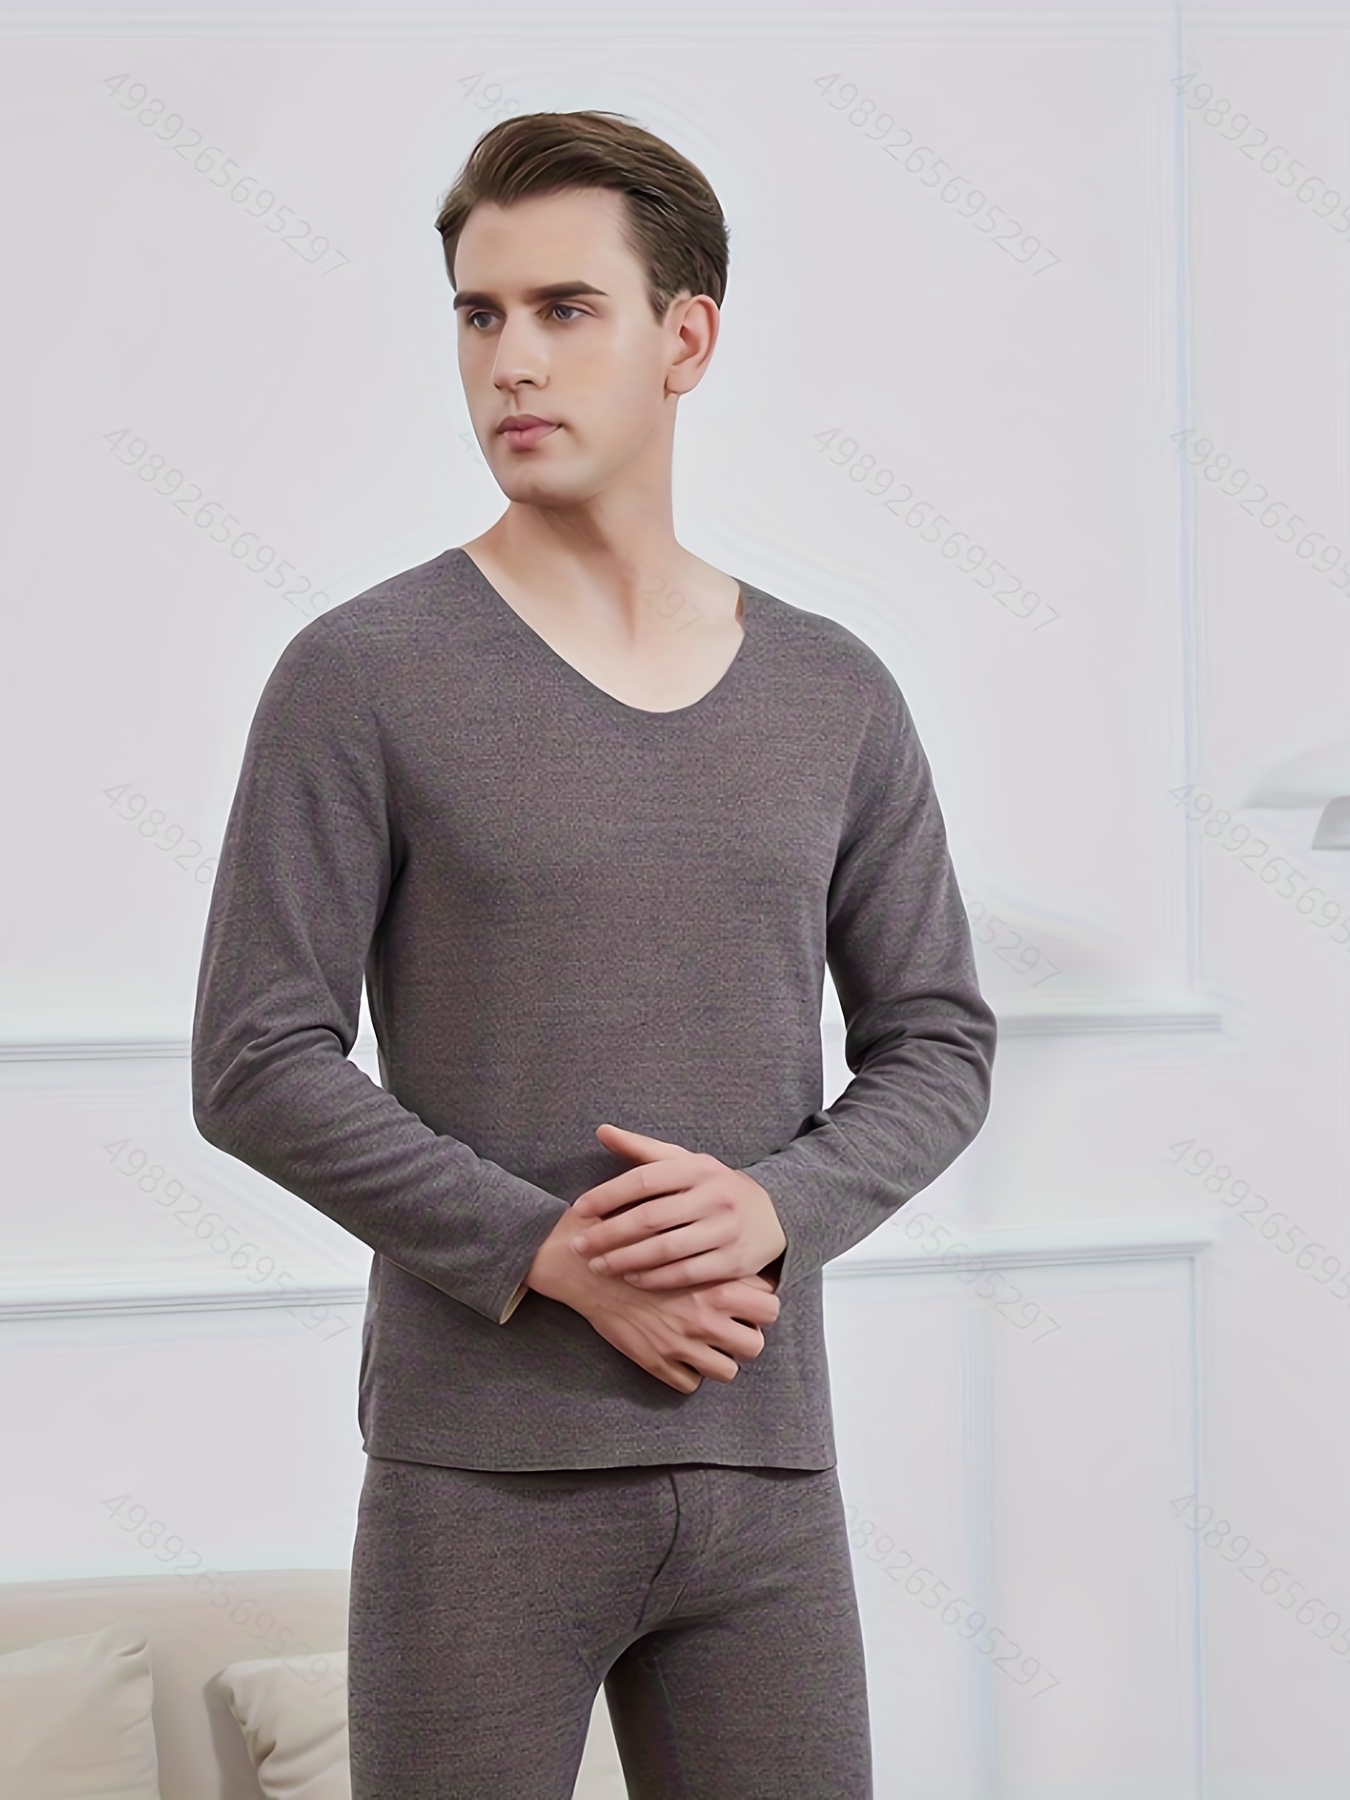 Stay Warm and Comfortable This Winter with 2pcs Men's * Stretch Thermal  Underwear